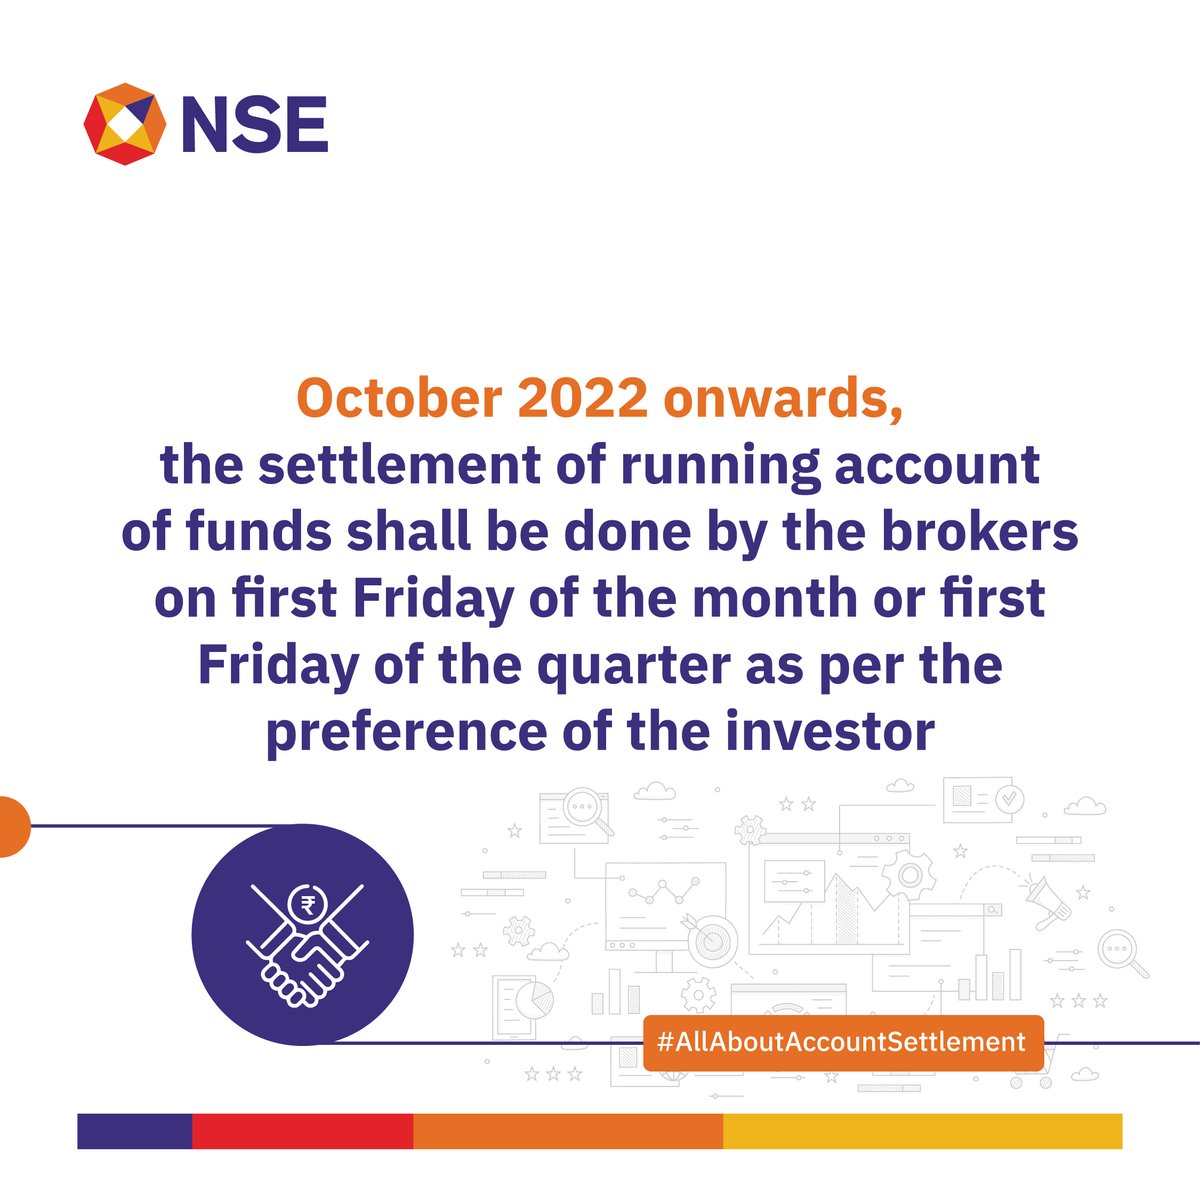 Investors, do you have excess/ unused funds lying in your trading account? If yes, we advise you to settle your trading accounts regularly. To know more visit: bit.ly/3MqpQdo #InvestorAwareness #NSE #IdleFunds #StockMarket #ShareMarket @ashishchauhan @psubbaraman